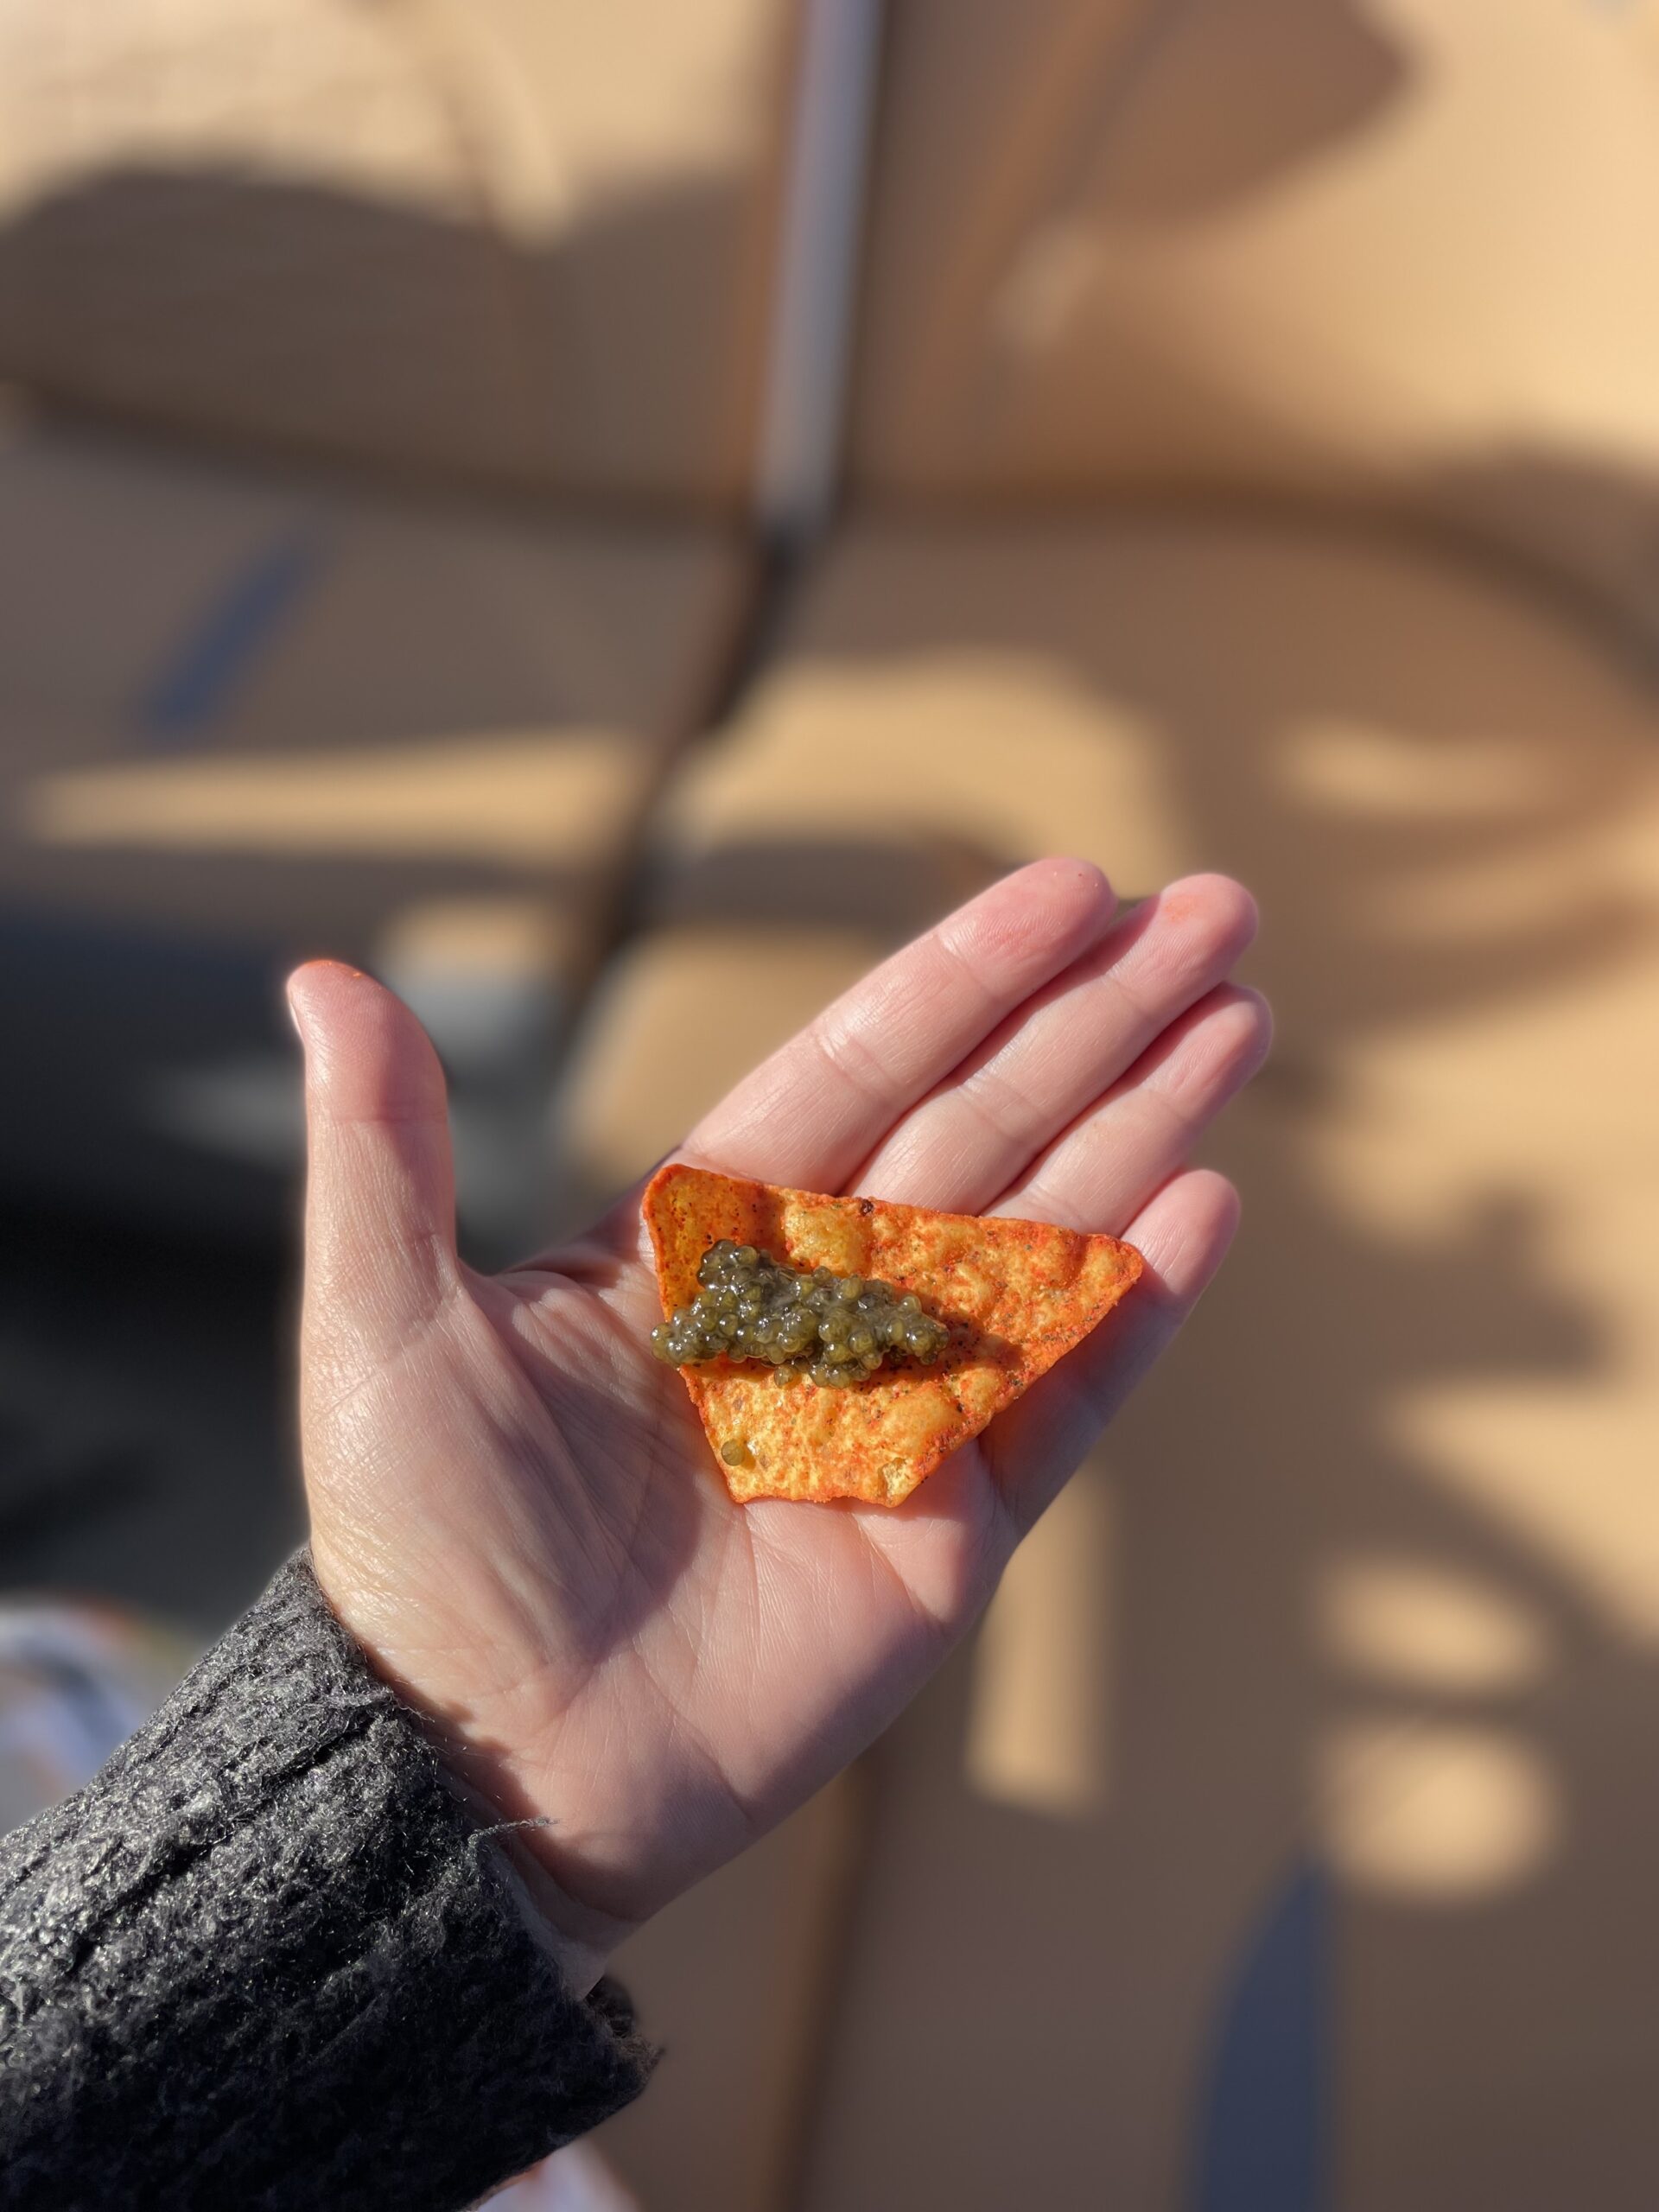 Selinger opted for Doritos to compliment her Prosecco and caviar while enjoying the views of Deer Creek reservoir.